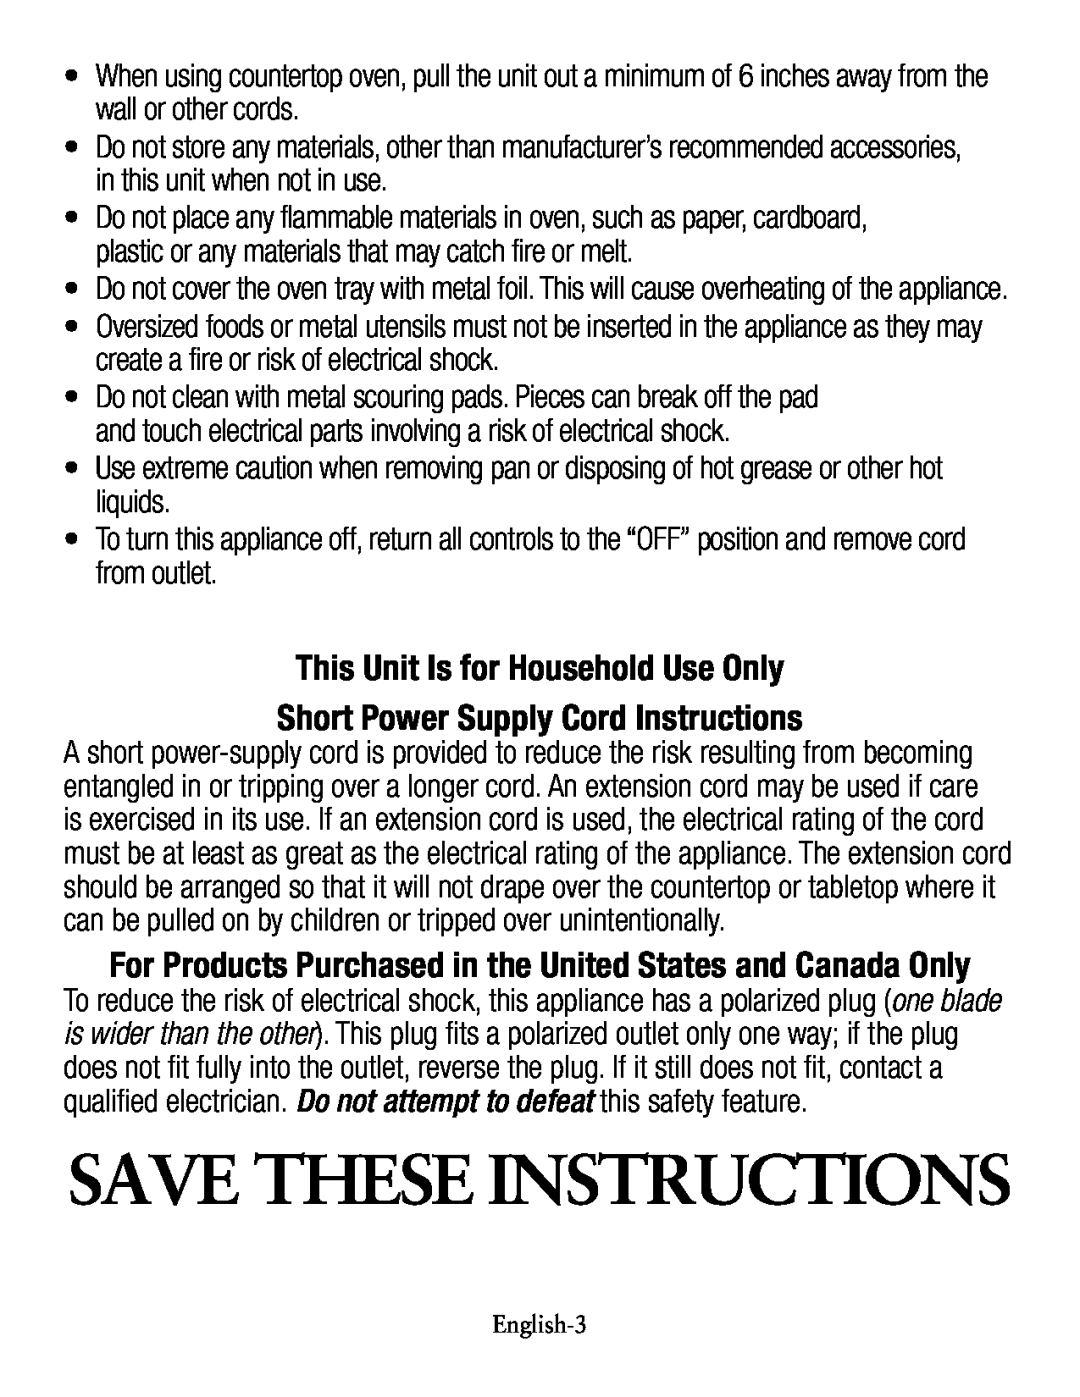 Oster TSSTTVCG01 Save These Instructions, This Unit Is for Household Use Only, Short Power Supply Cord Instructions 